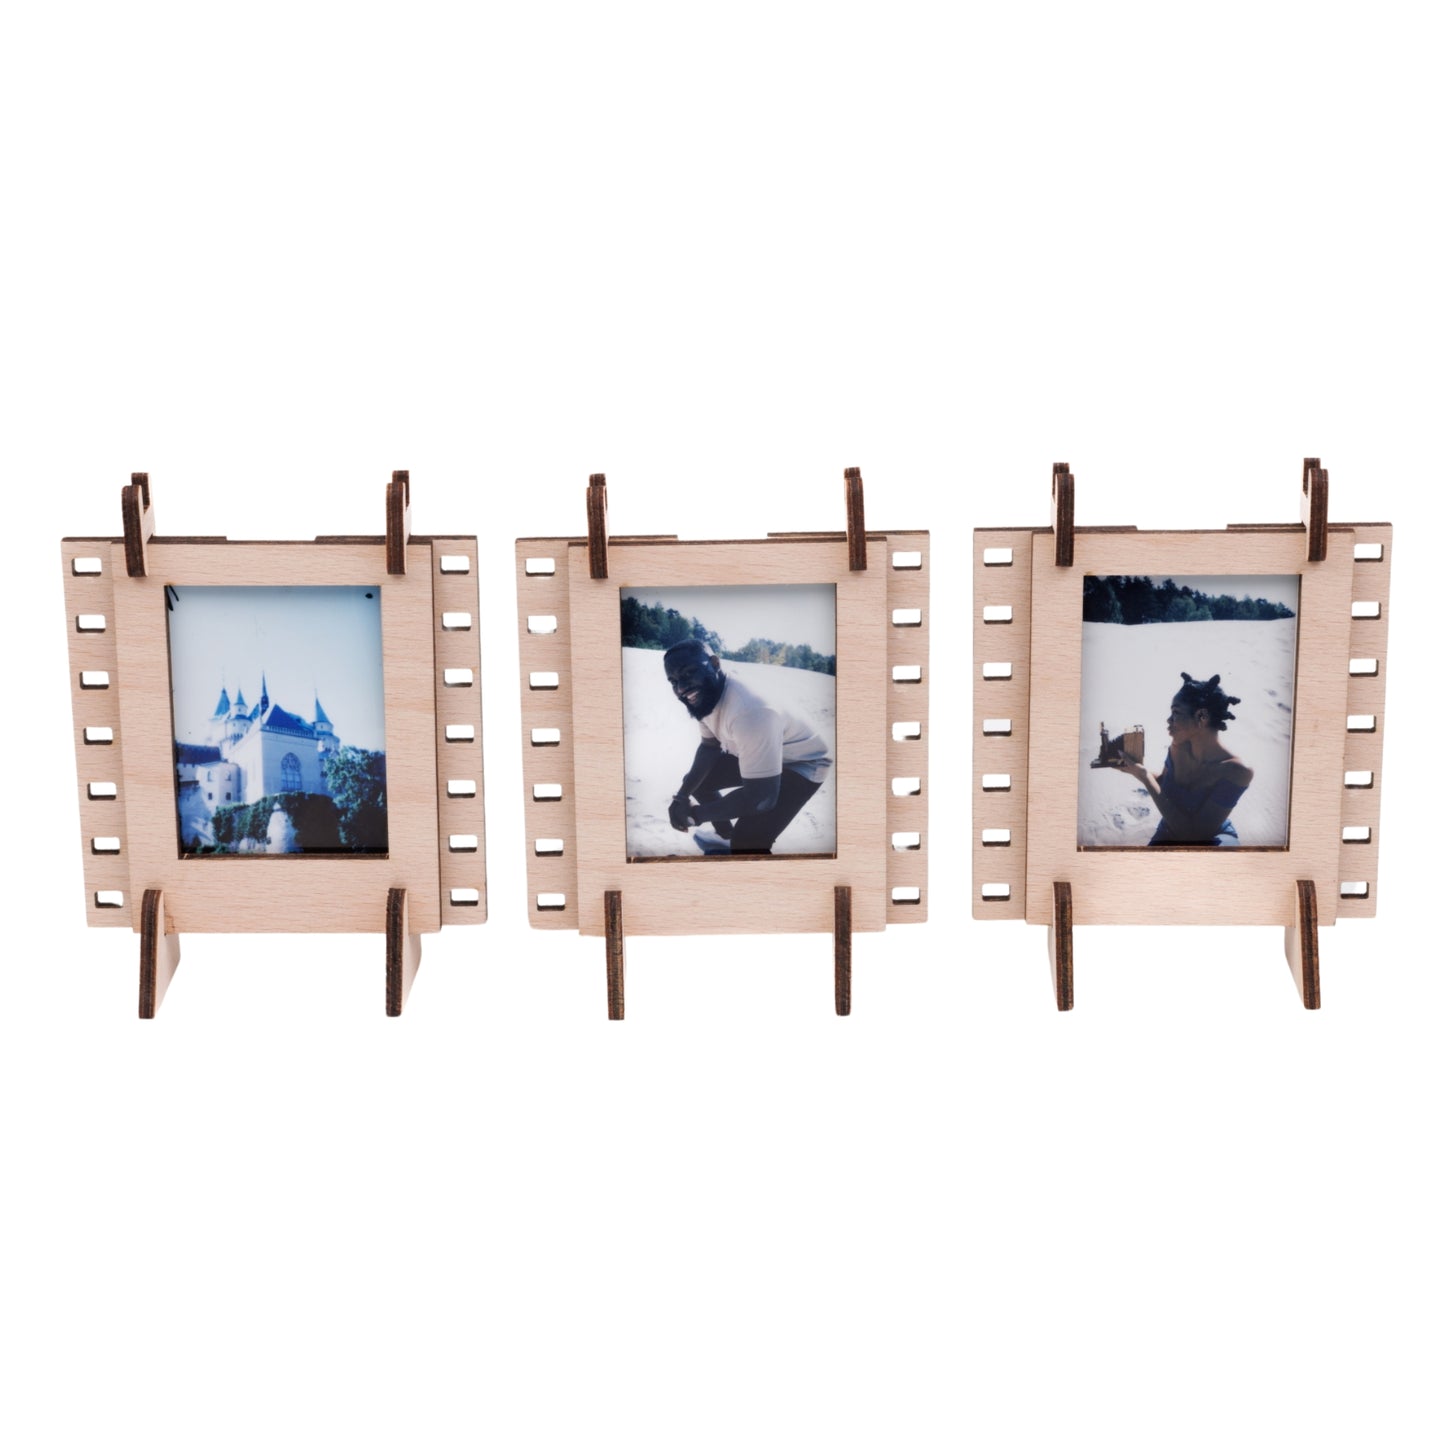 A set of three natural plywood interconnectable Instax mini film photo frames for instant mini photos.